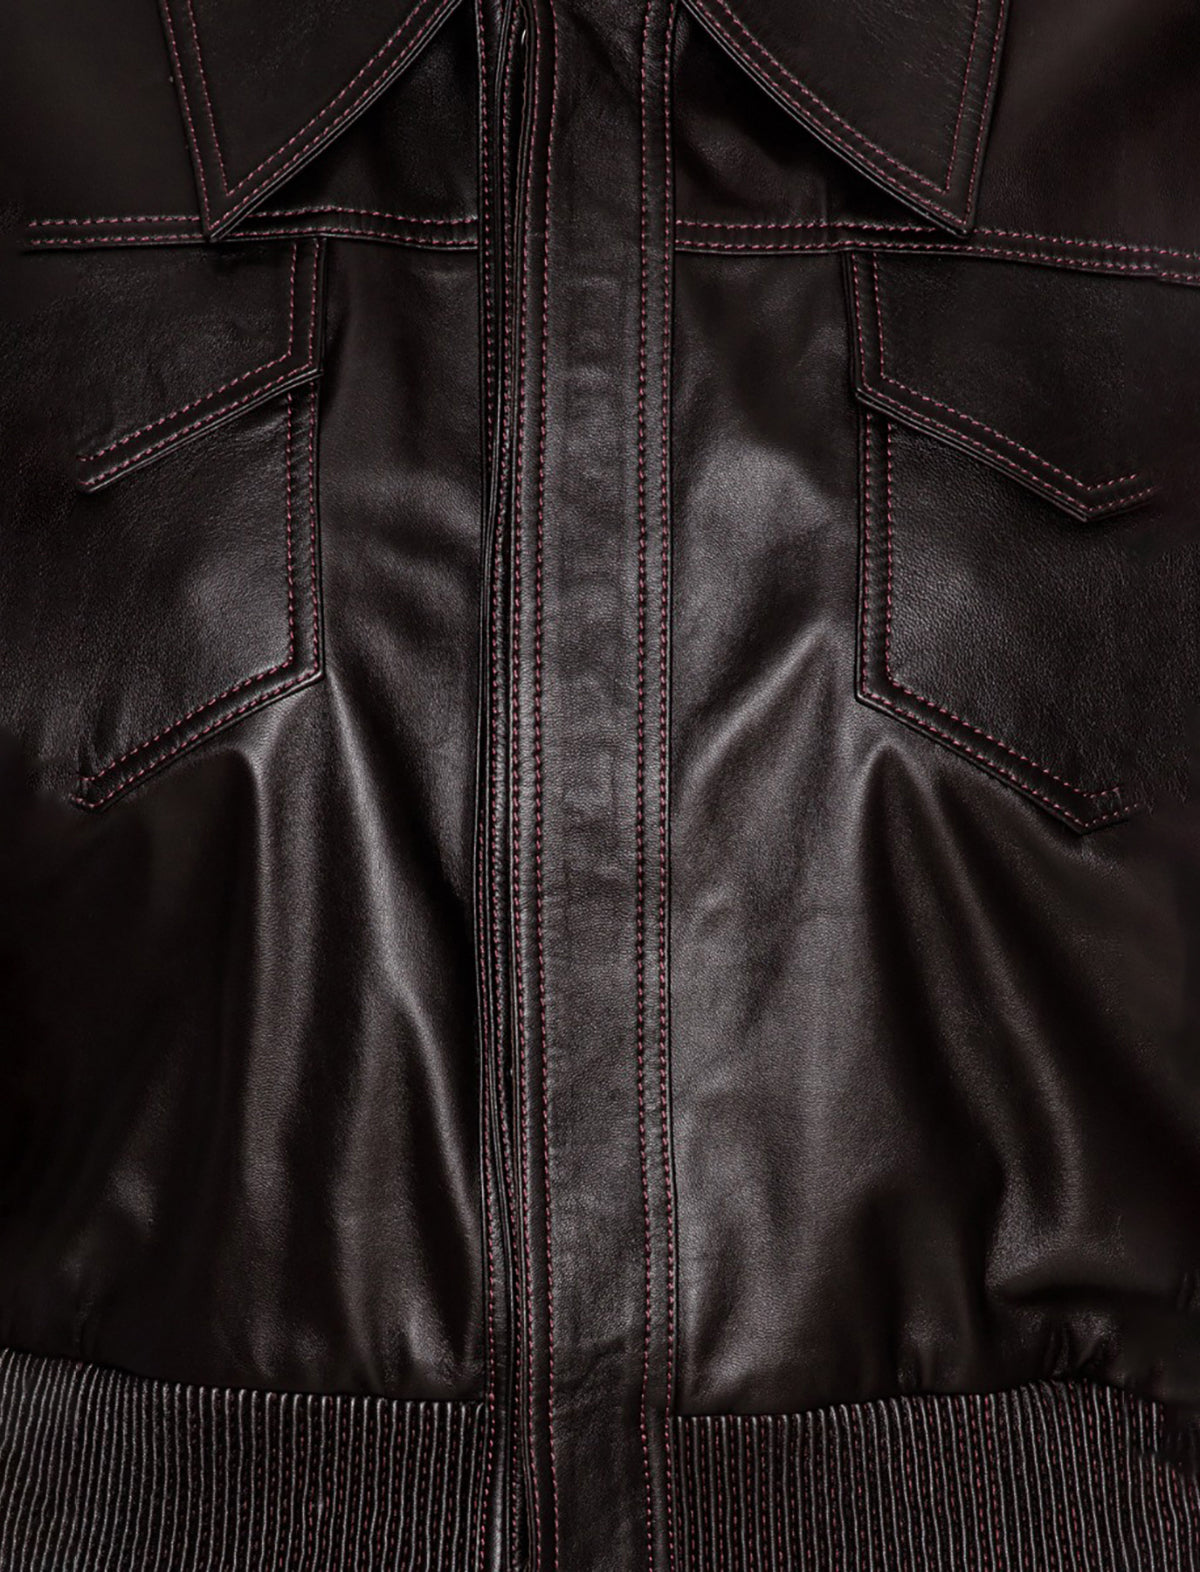 REMAIN Small Leather Jacket in Chocolate Plum